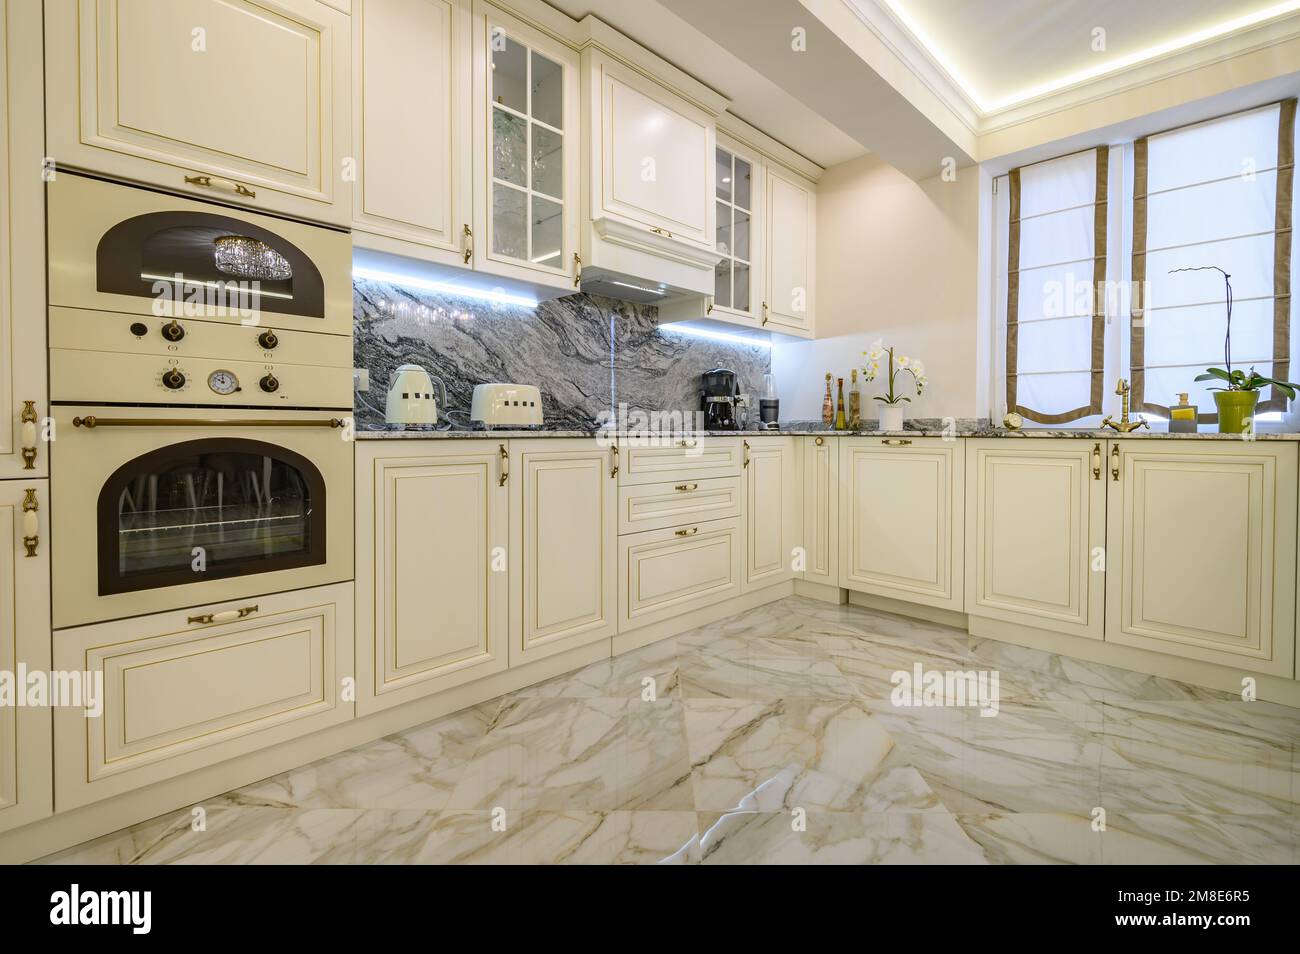 https://c8.alamy.com/comp/2M8E6R5/closeup-of-classic-cream-colored-kitchen-with-oven-microwave-and-other-appliances-2M8E6R5.jpg